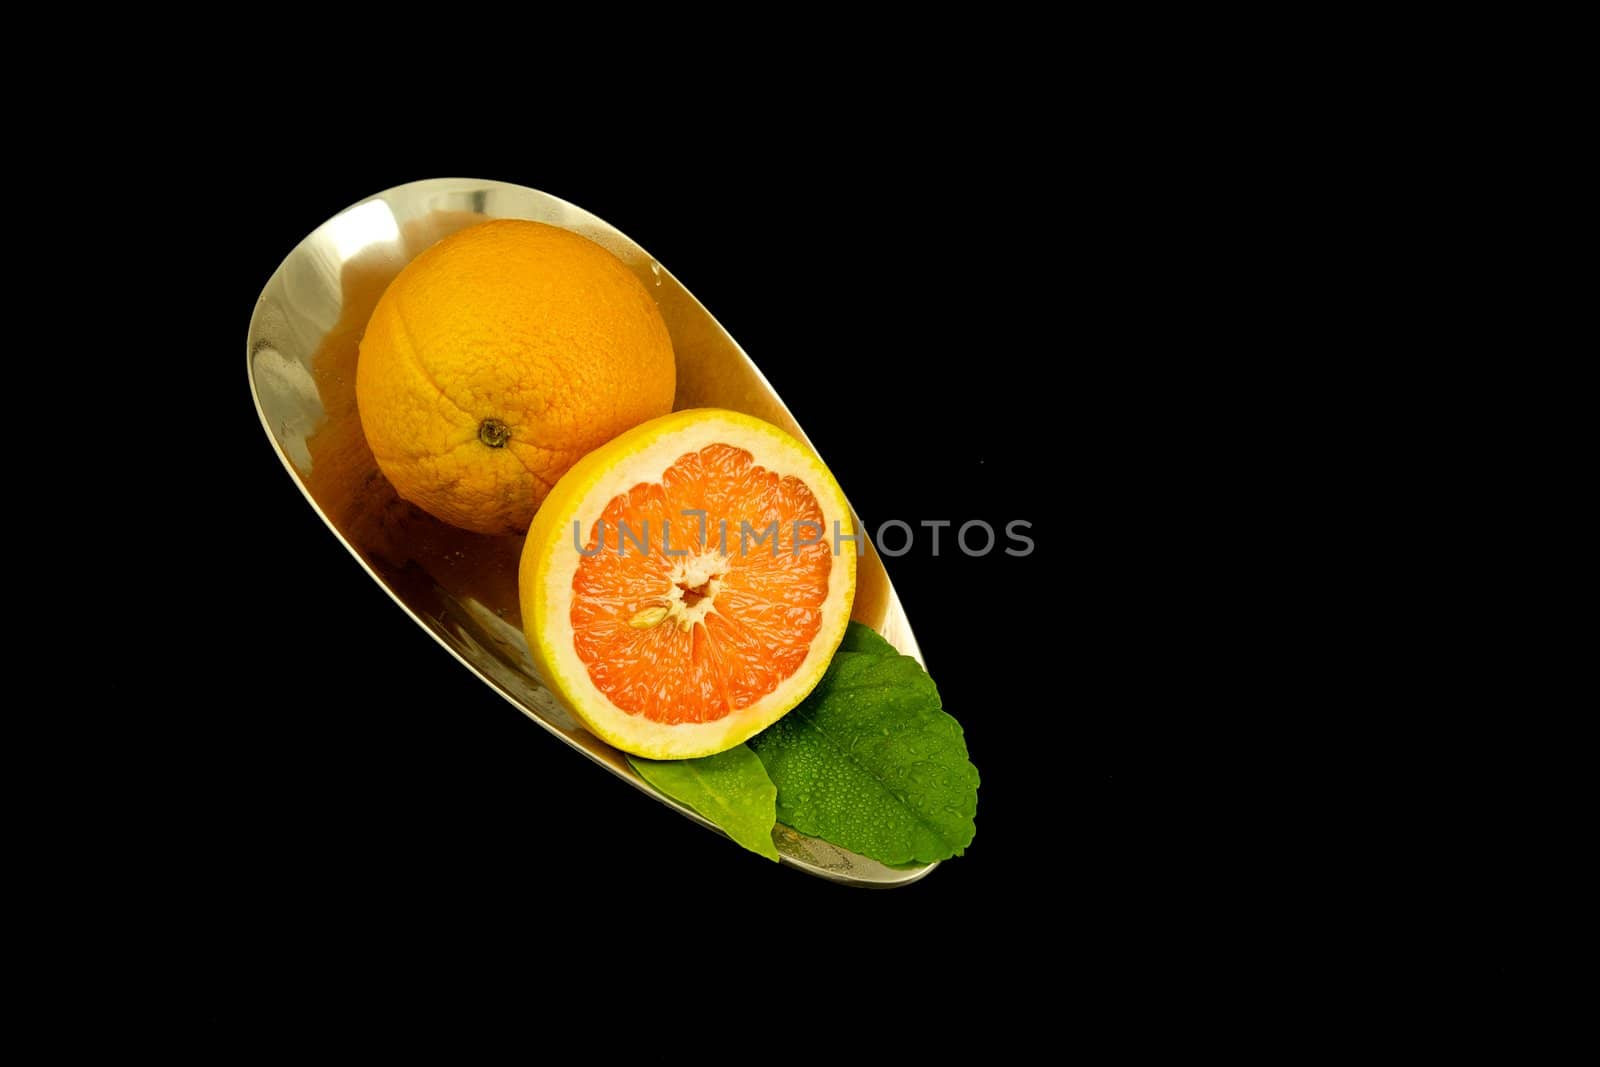 Oranges in a bowl with a black background